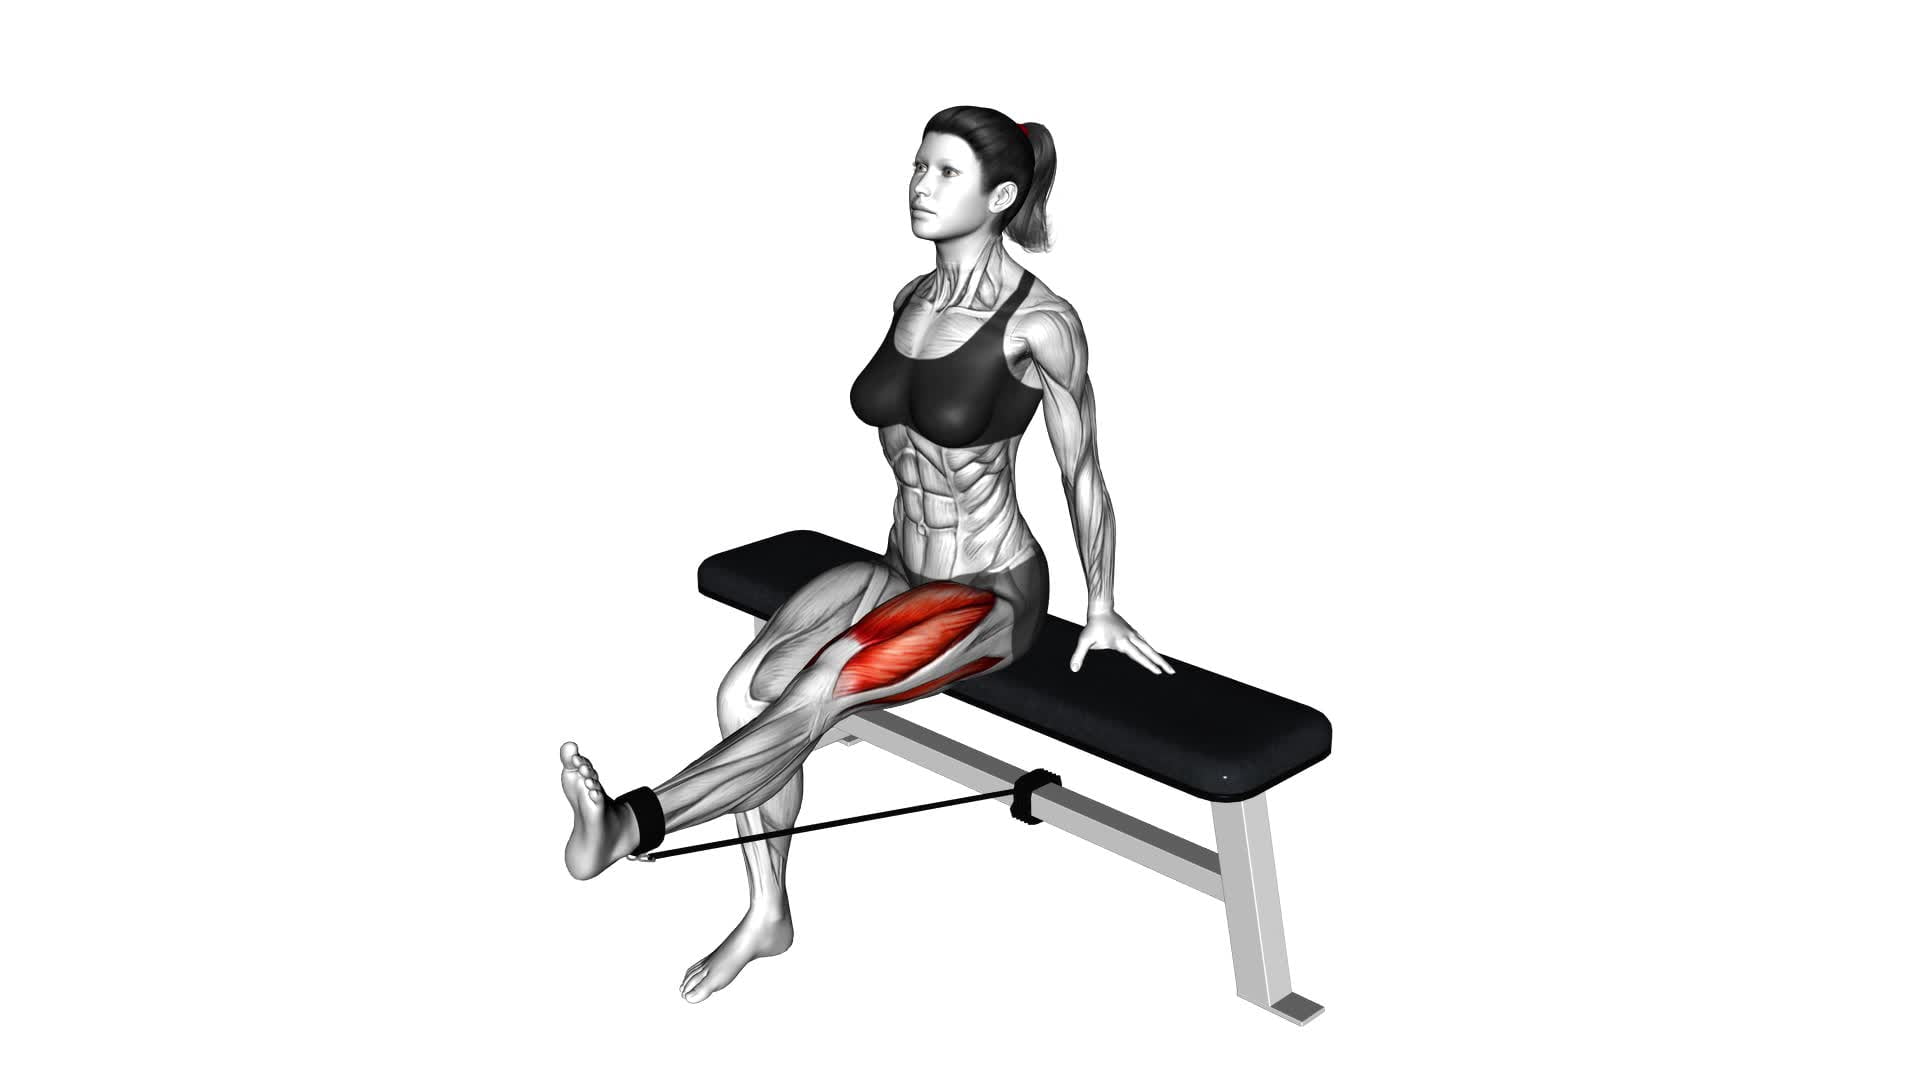 Band Seated Leg Extension (female) - Video Exercise Guide & Tips